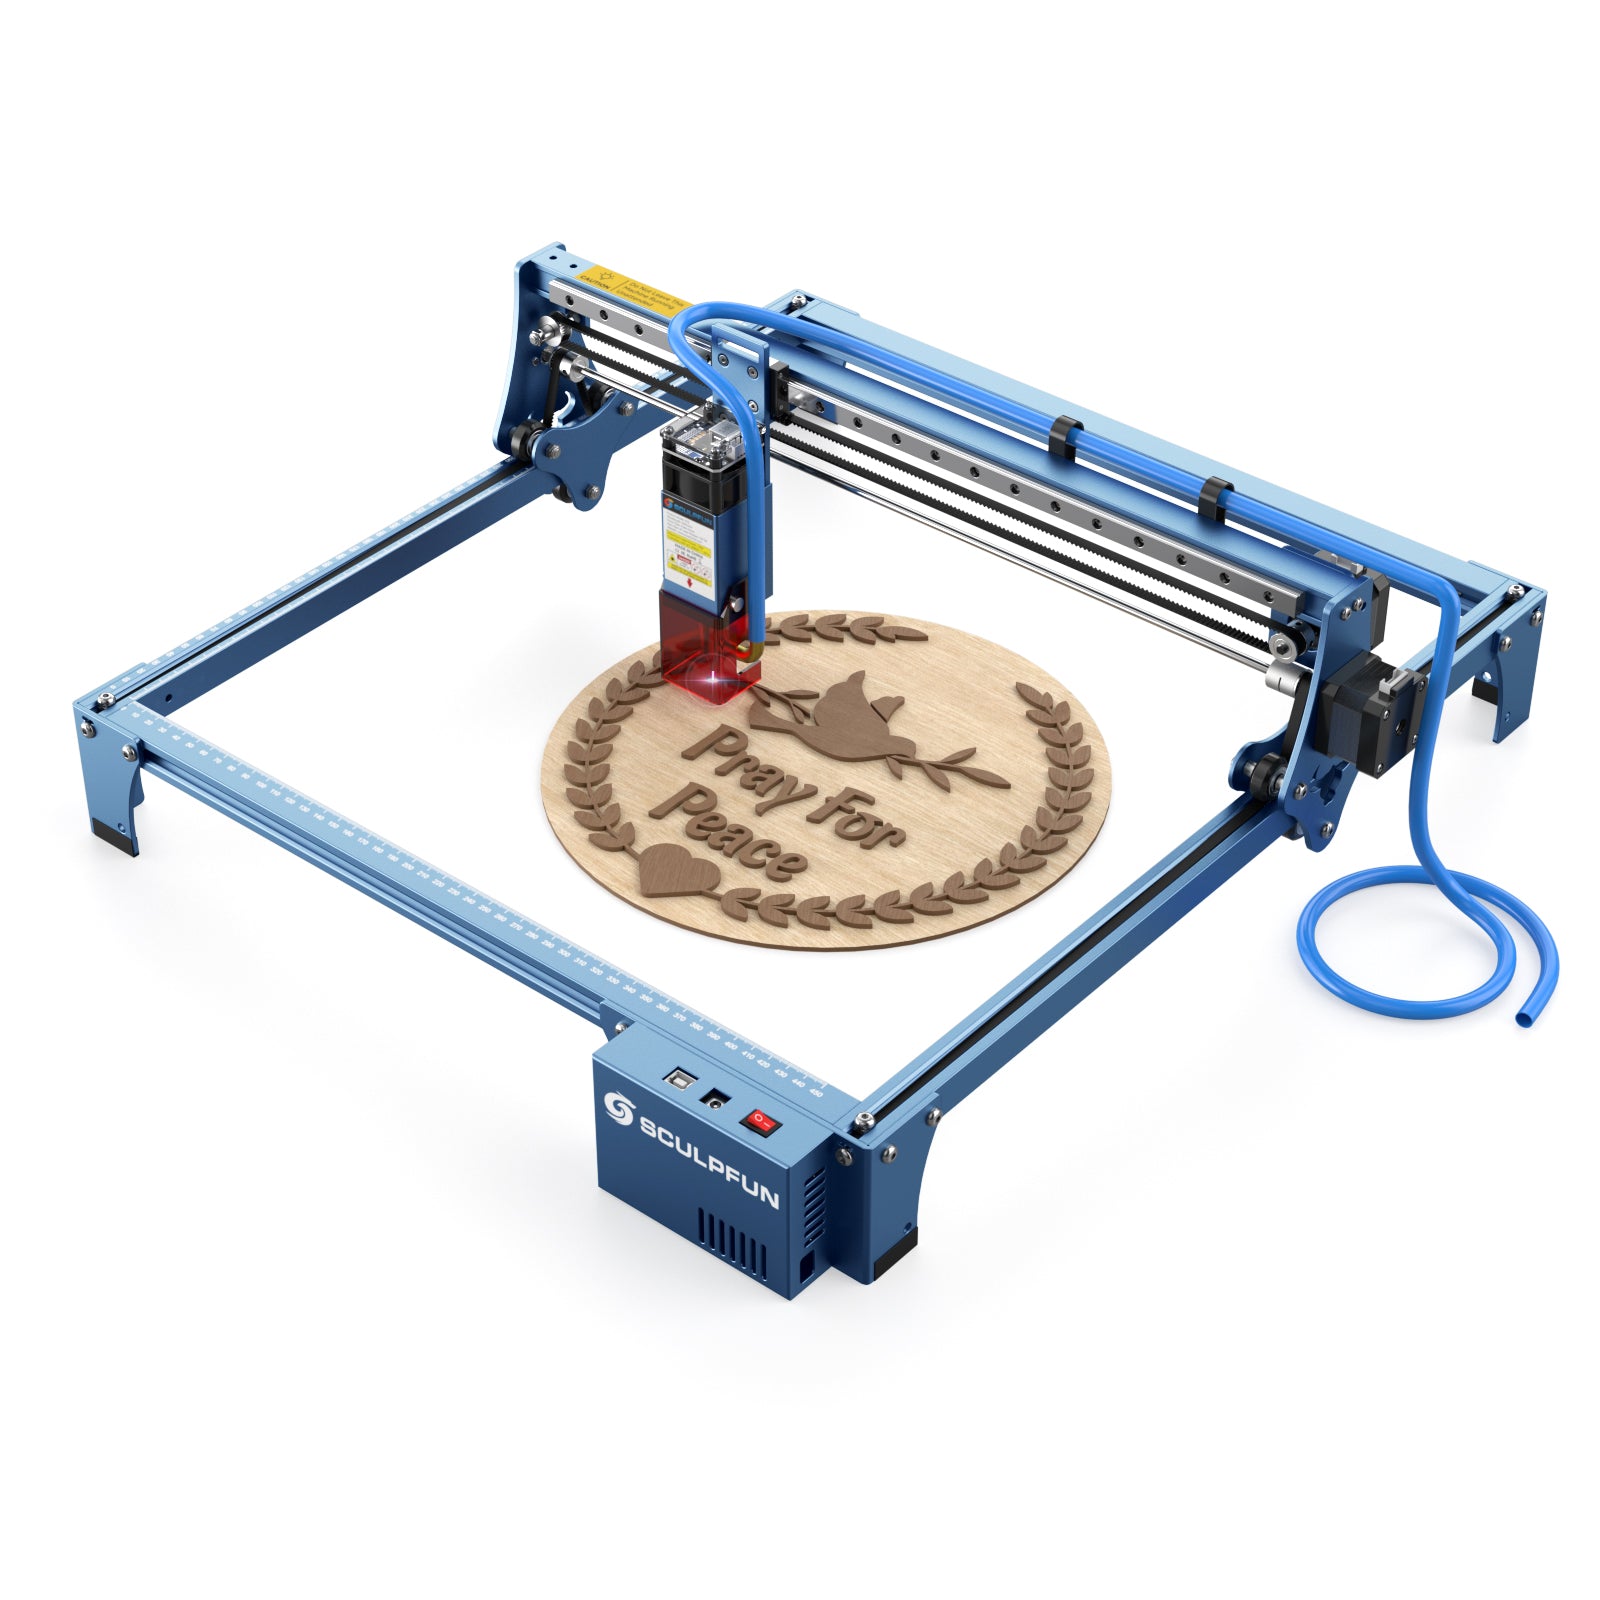 Sculpfun S9 Laser Engraving Machine: Incredible Results at a Decent Price 